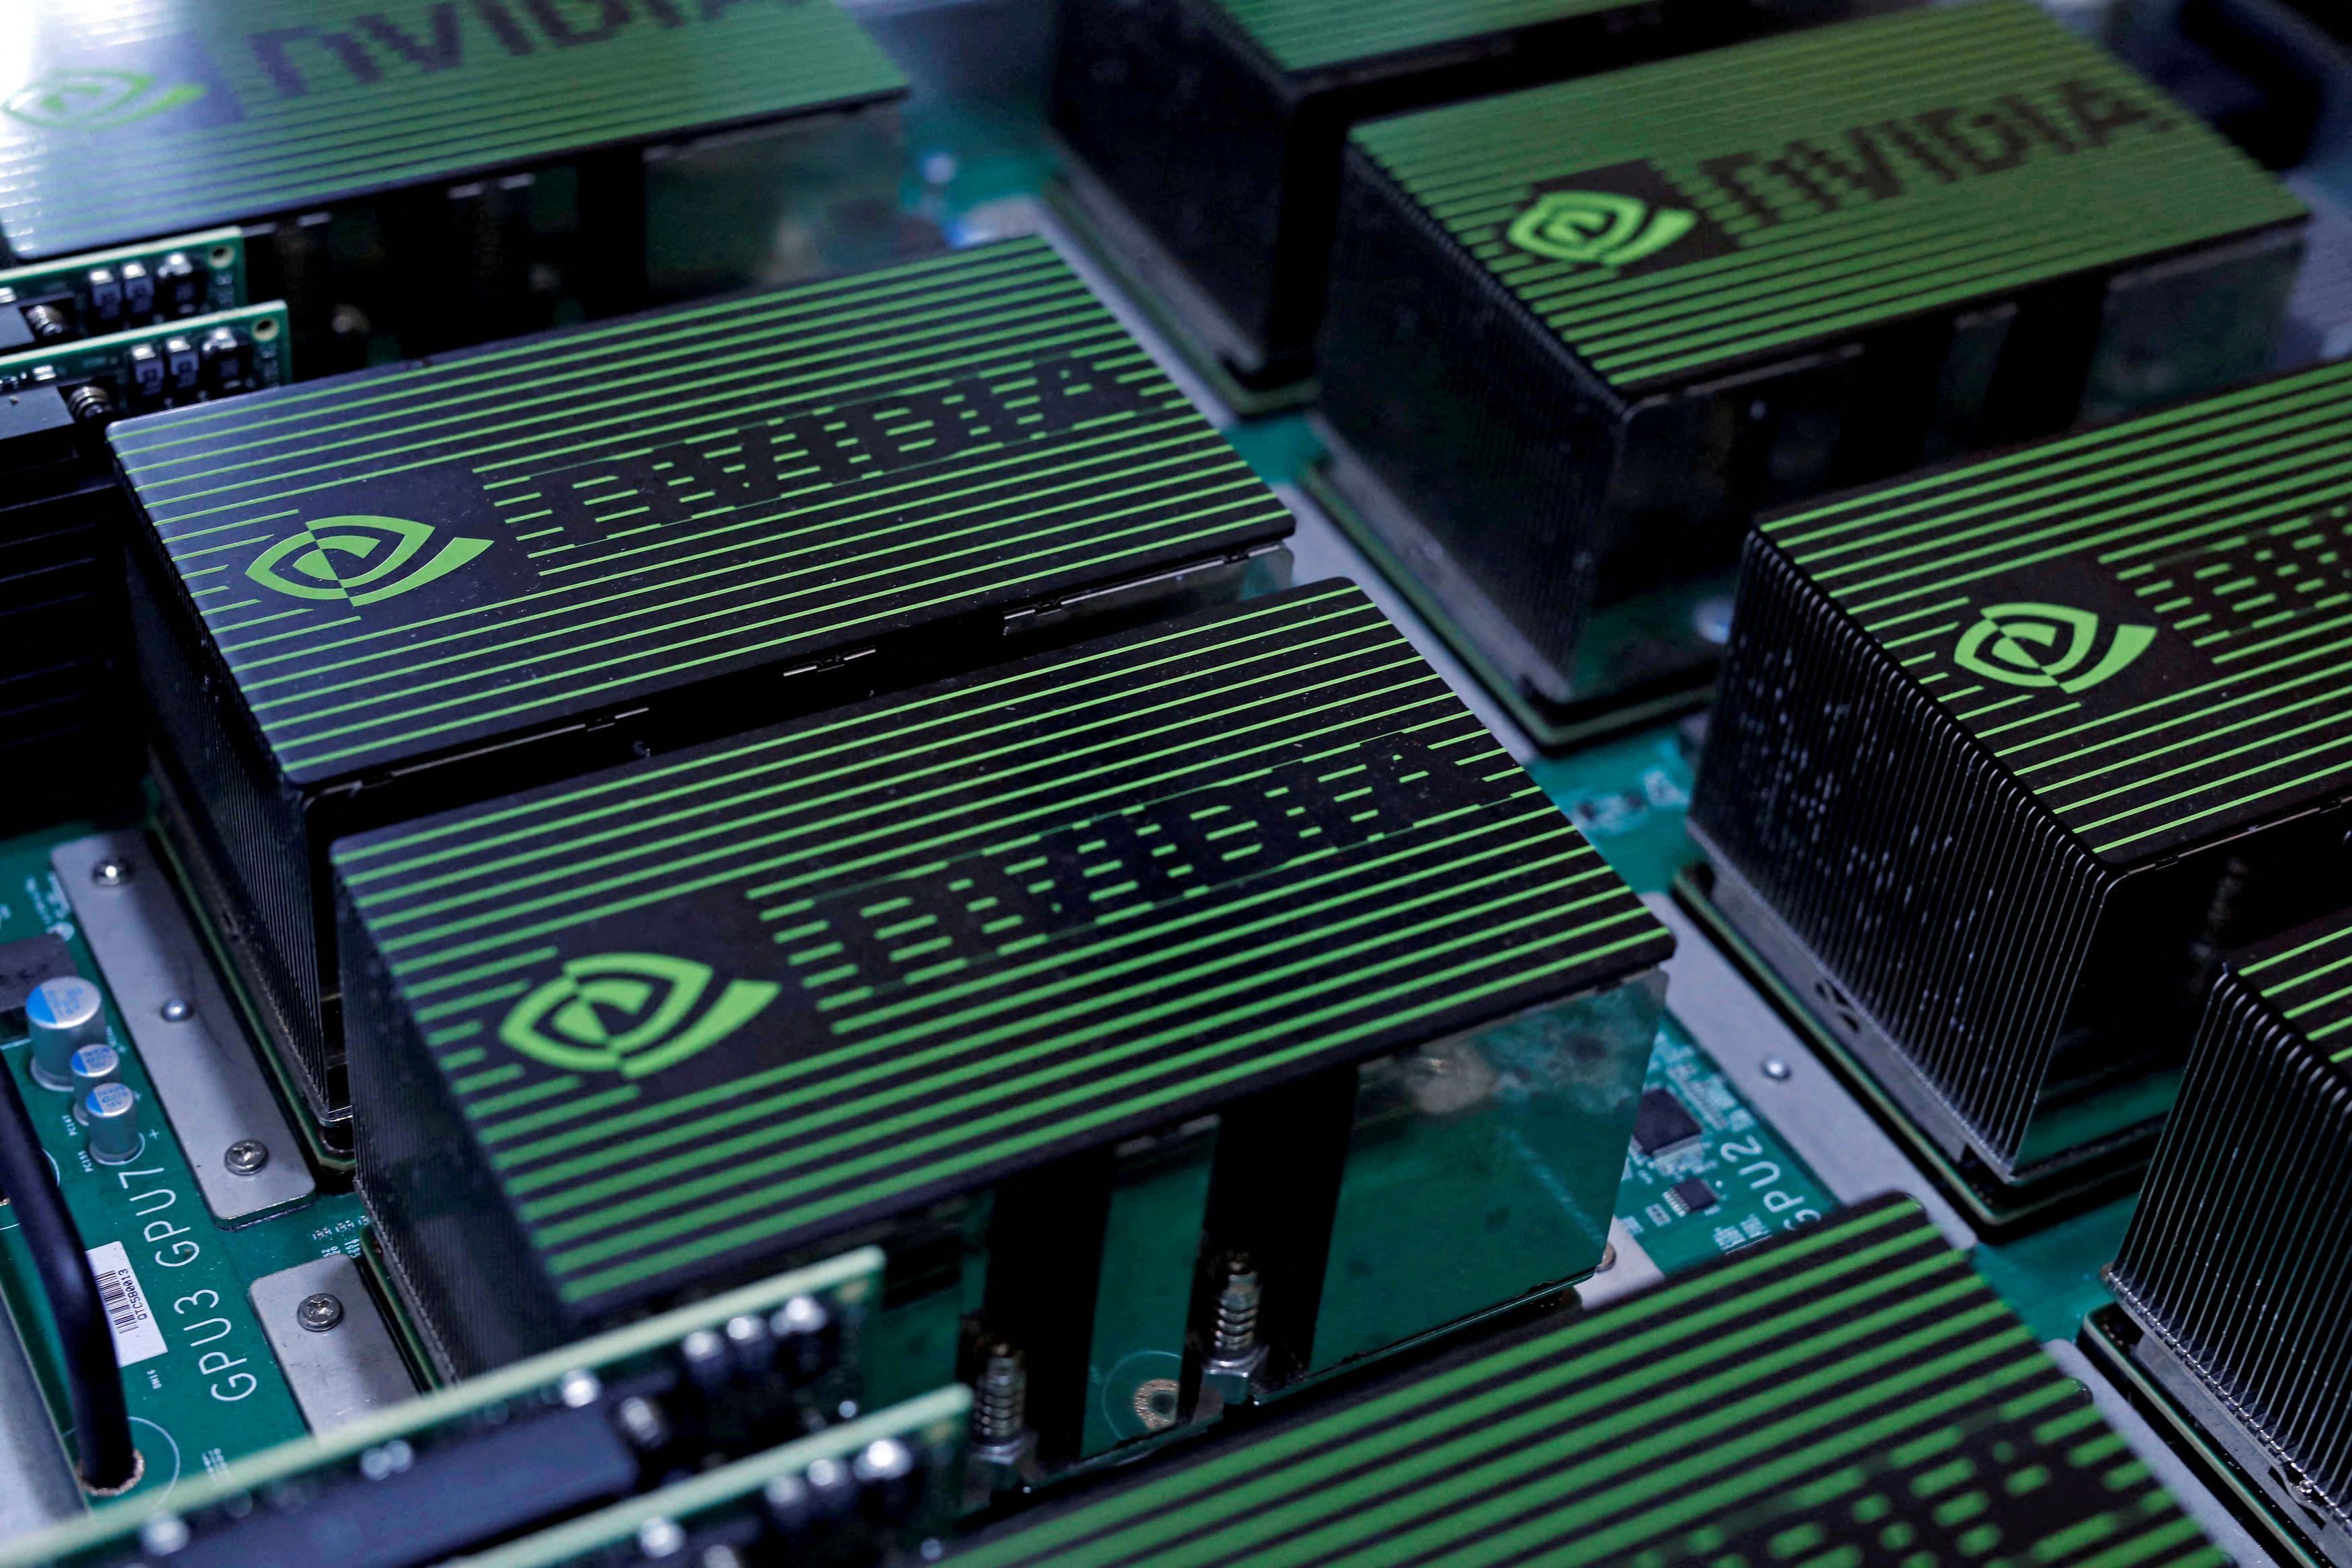 Nvidia's tremendous beating and uptake reinforce Cramer's 'Own it, don't trade it' mantra